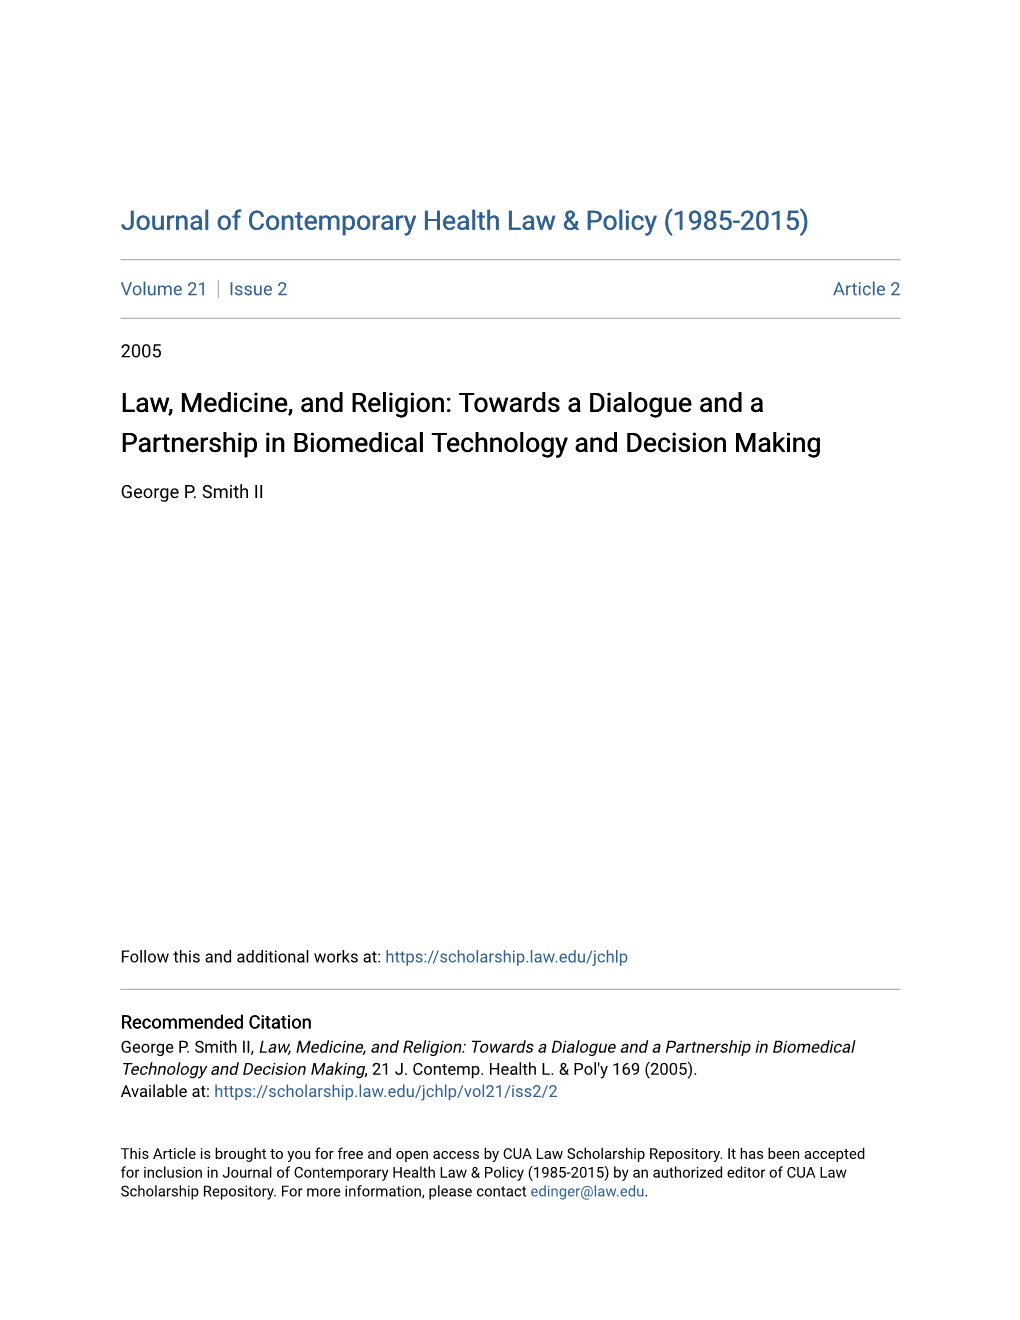 Law, Medicine, and Religion: Towards a Dialogue and a Partnership in Biomedical Technology and Decision Making